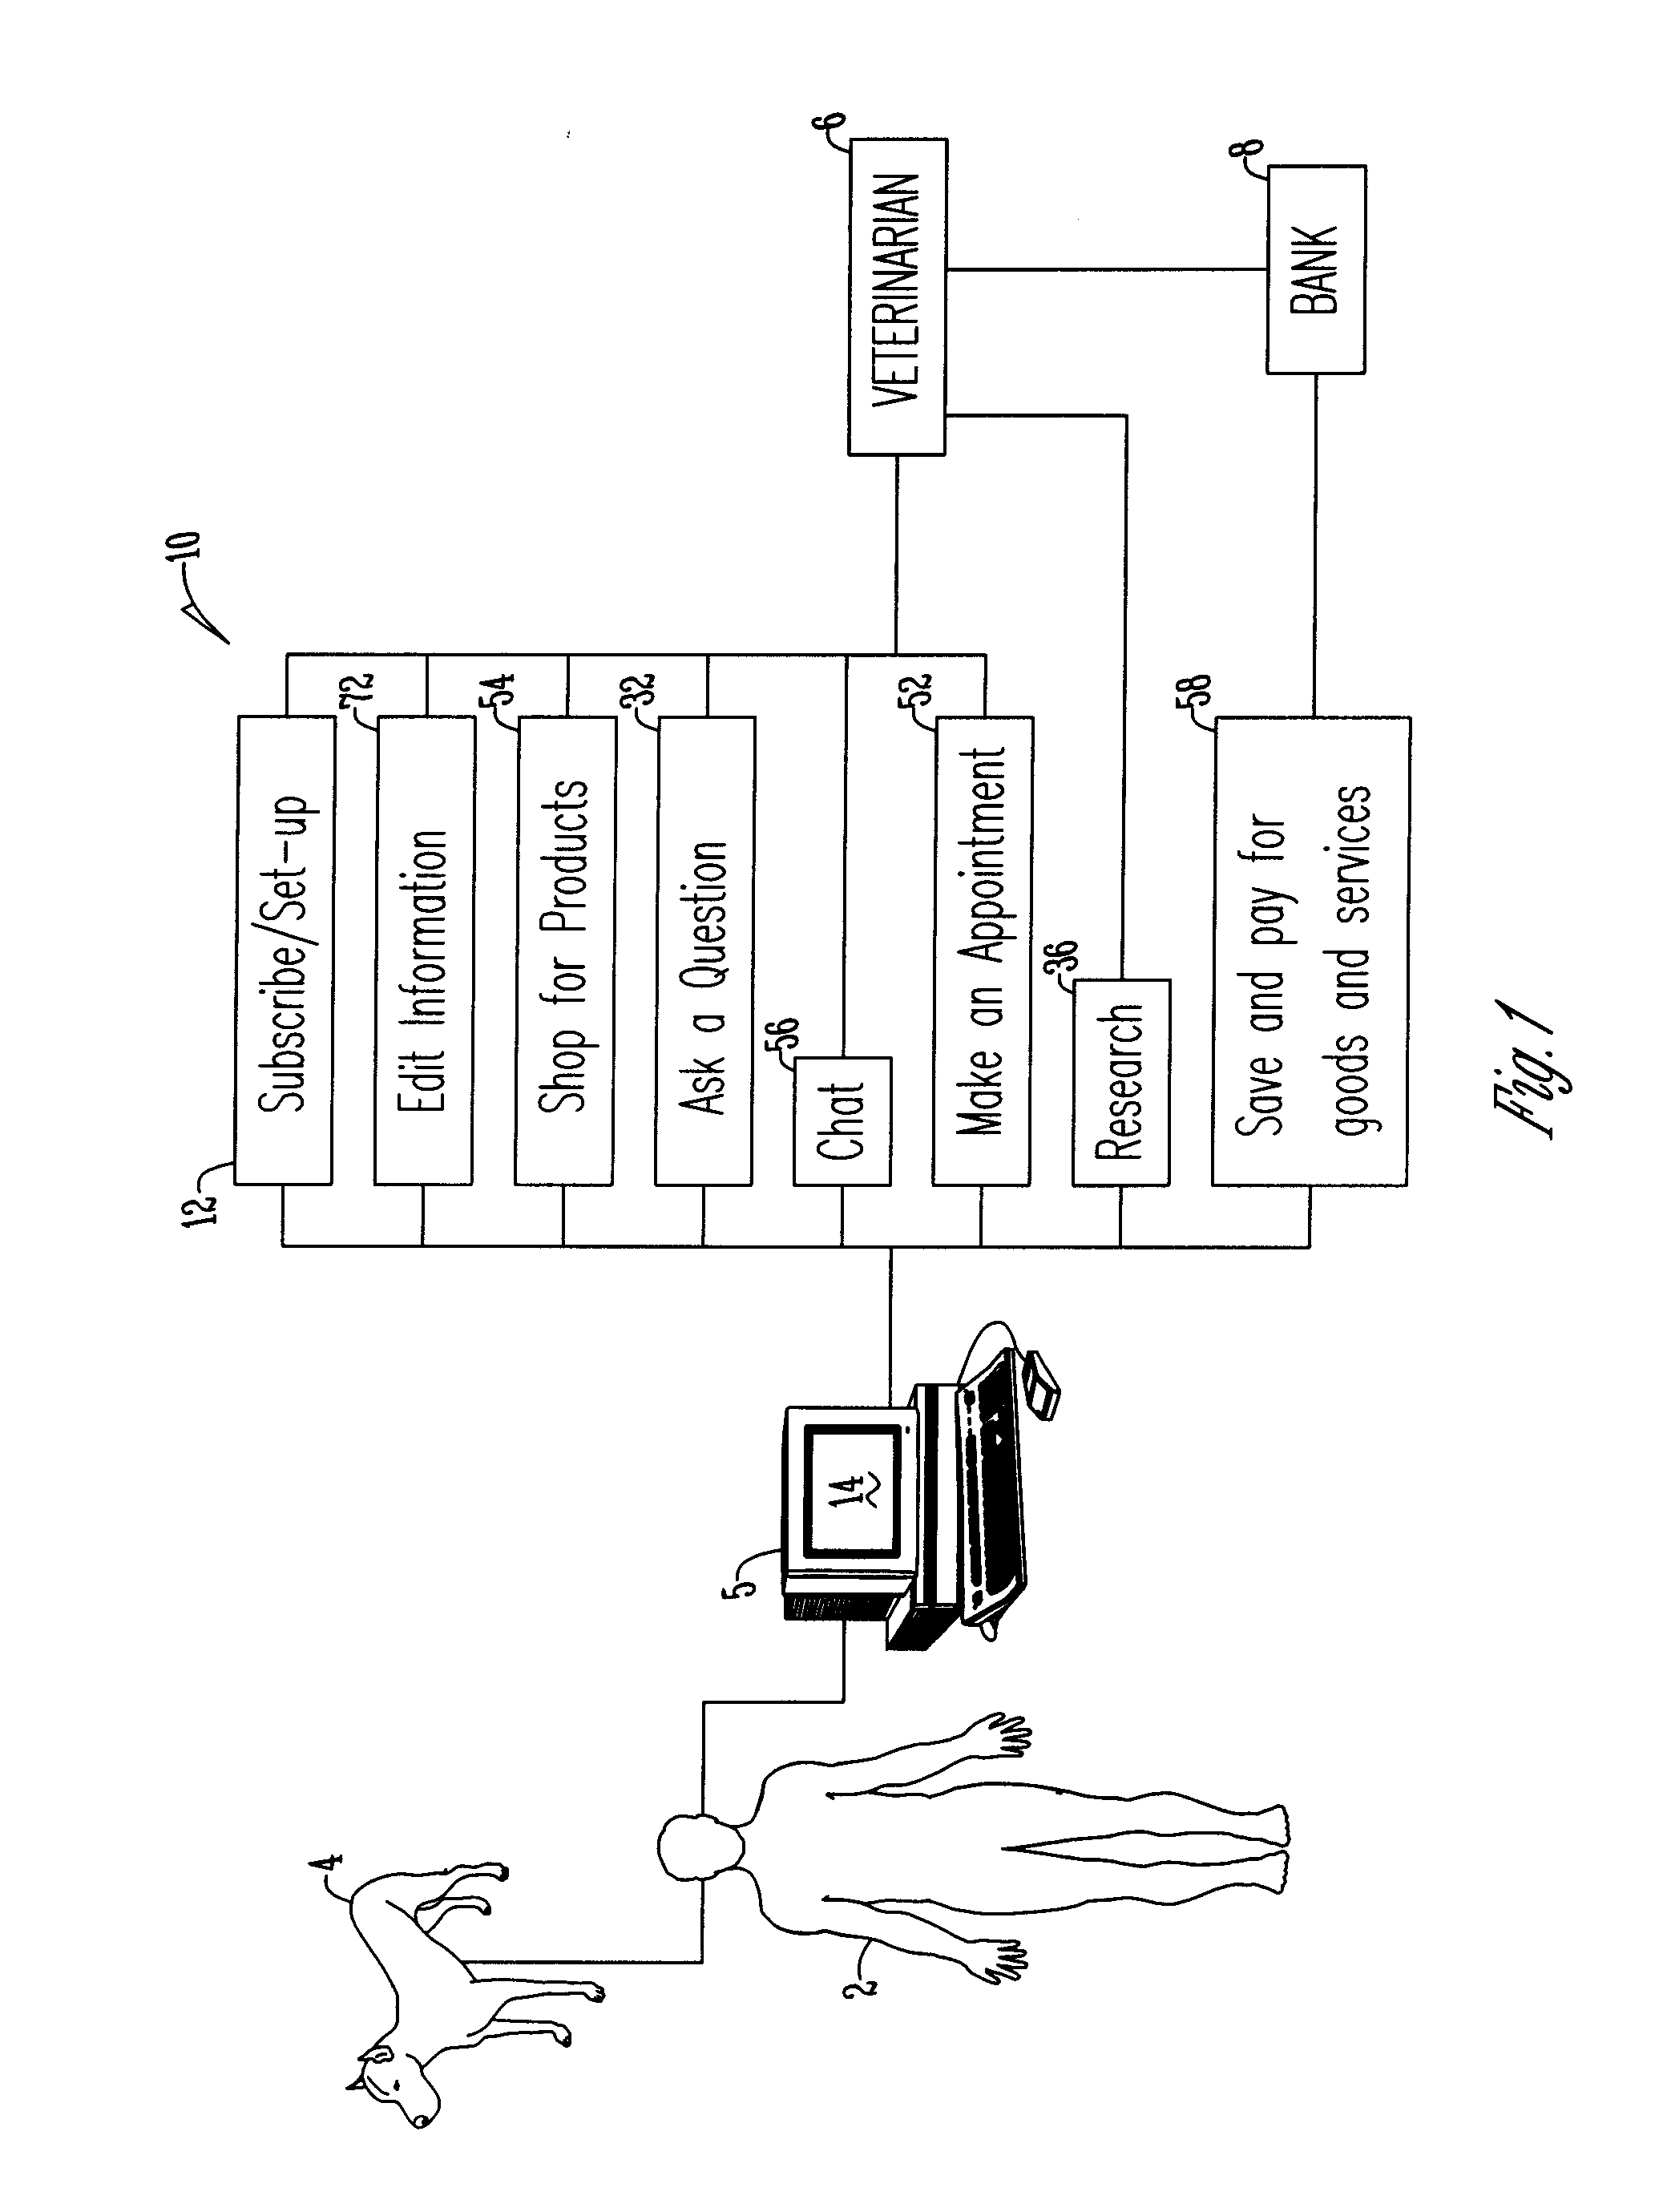 Method for accessing veterinary health care information and financing veterinary health care services